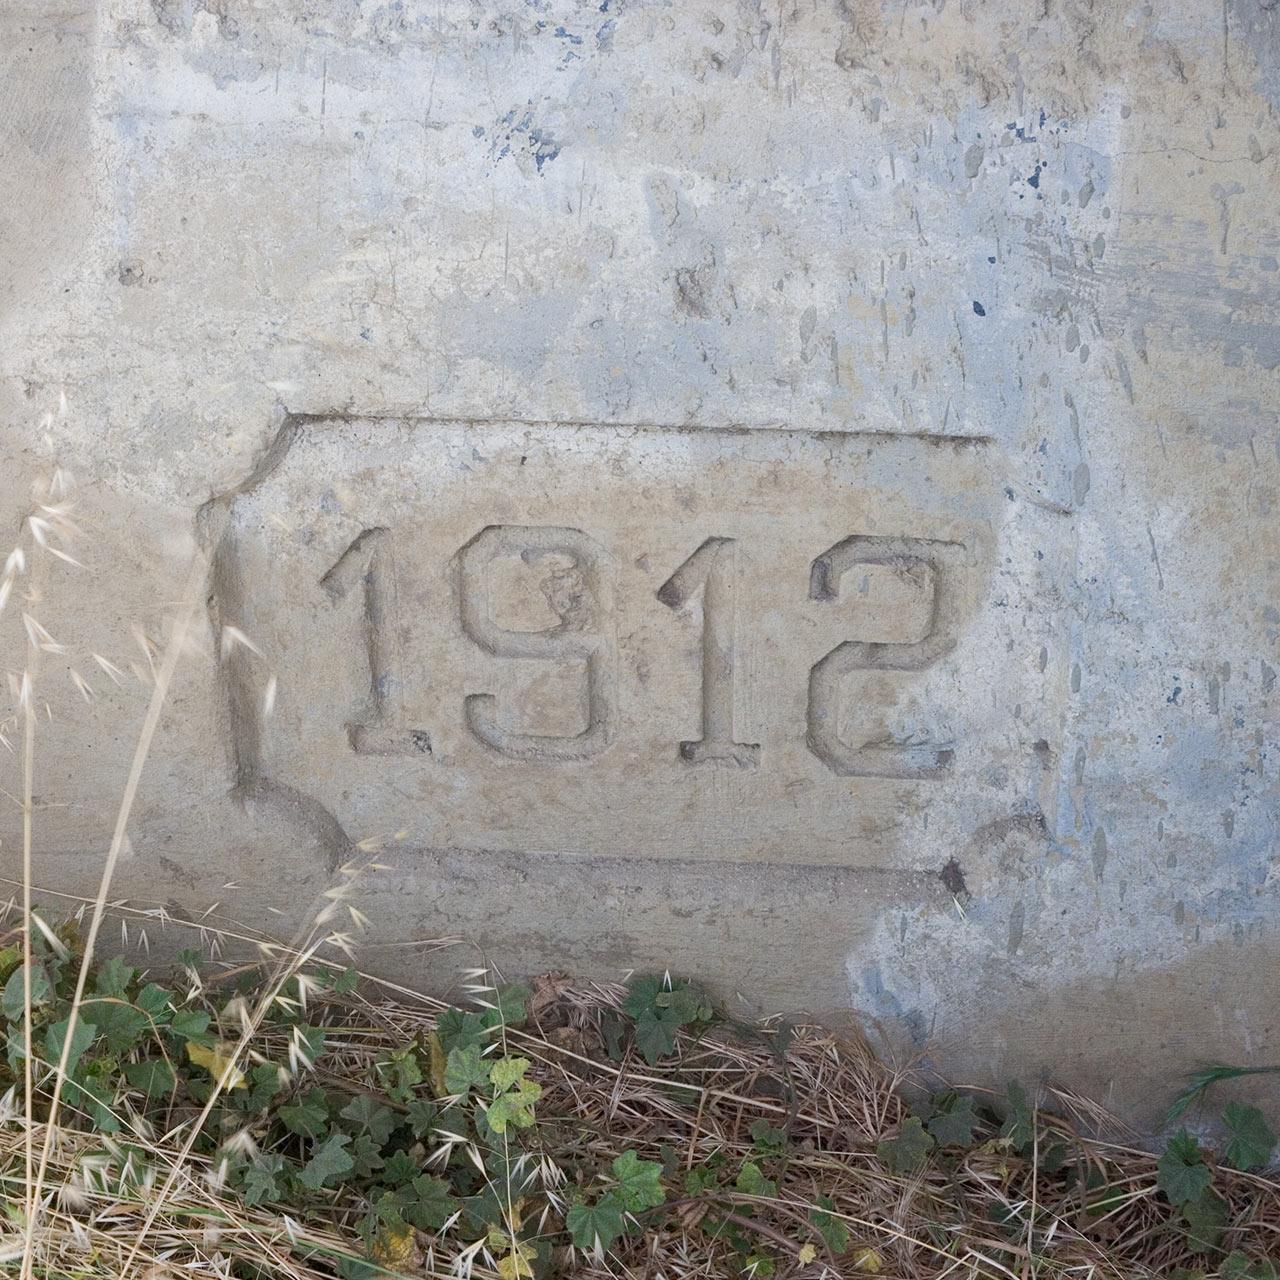 Date of construction in base.